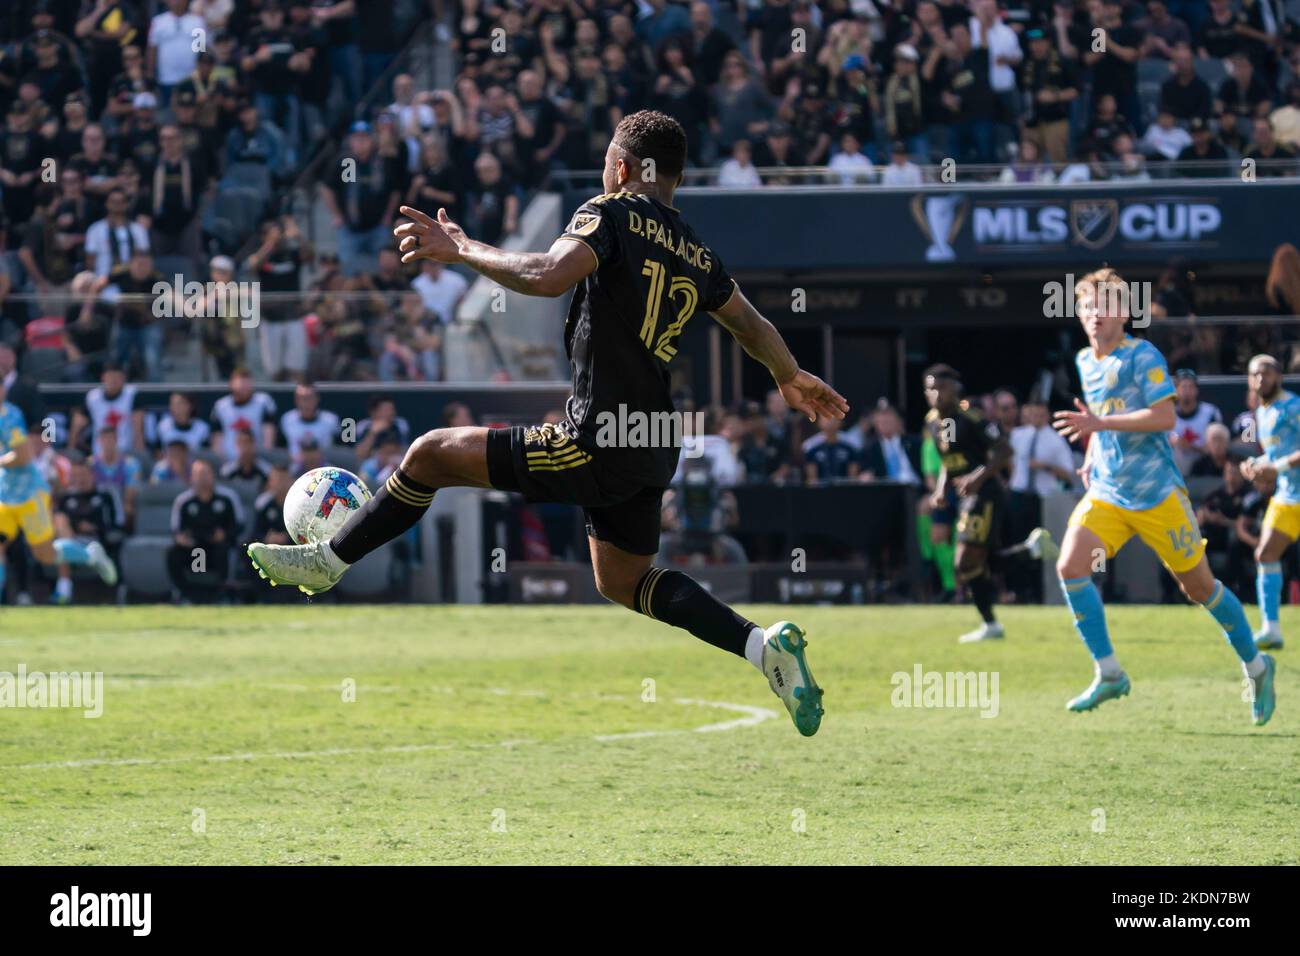 Los Angeles FC defender Diego Palacios (12) during the MLS Cup match against the Philadelphia Union, Saturday, November 5, 2022, at the Banc of Califo Stock Photo